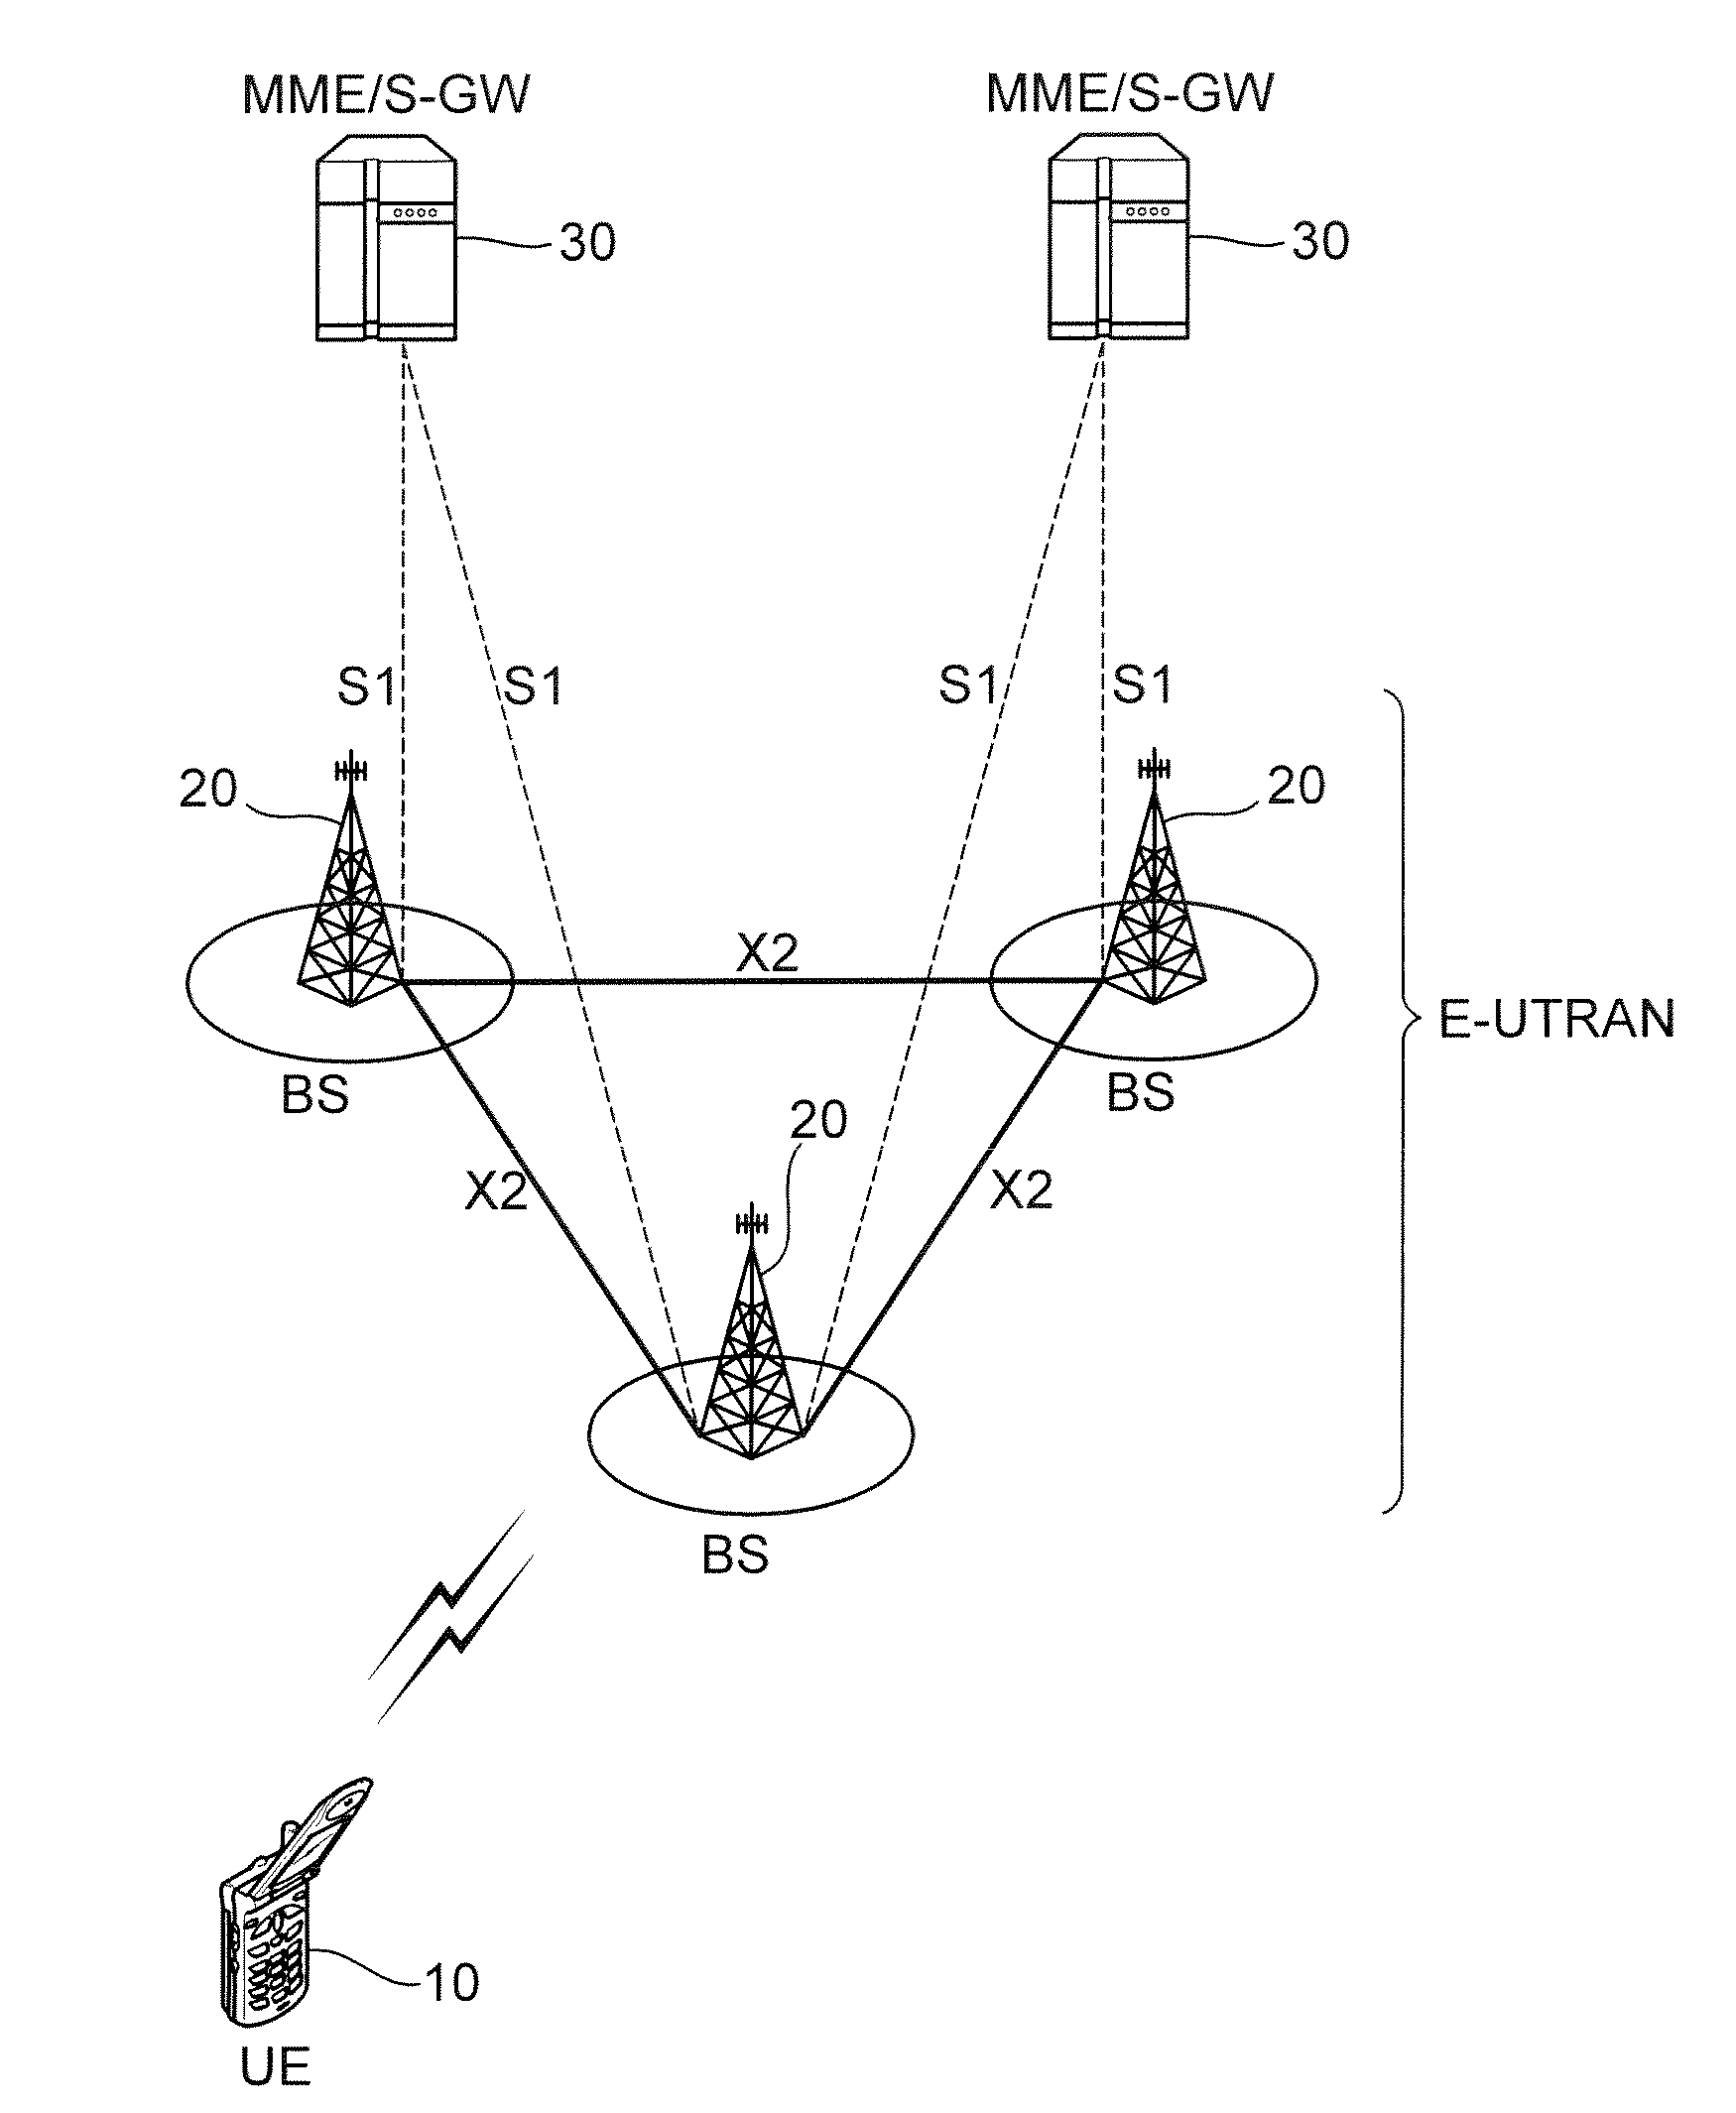 Wireless communication system for monitoring physical downlink control channel